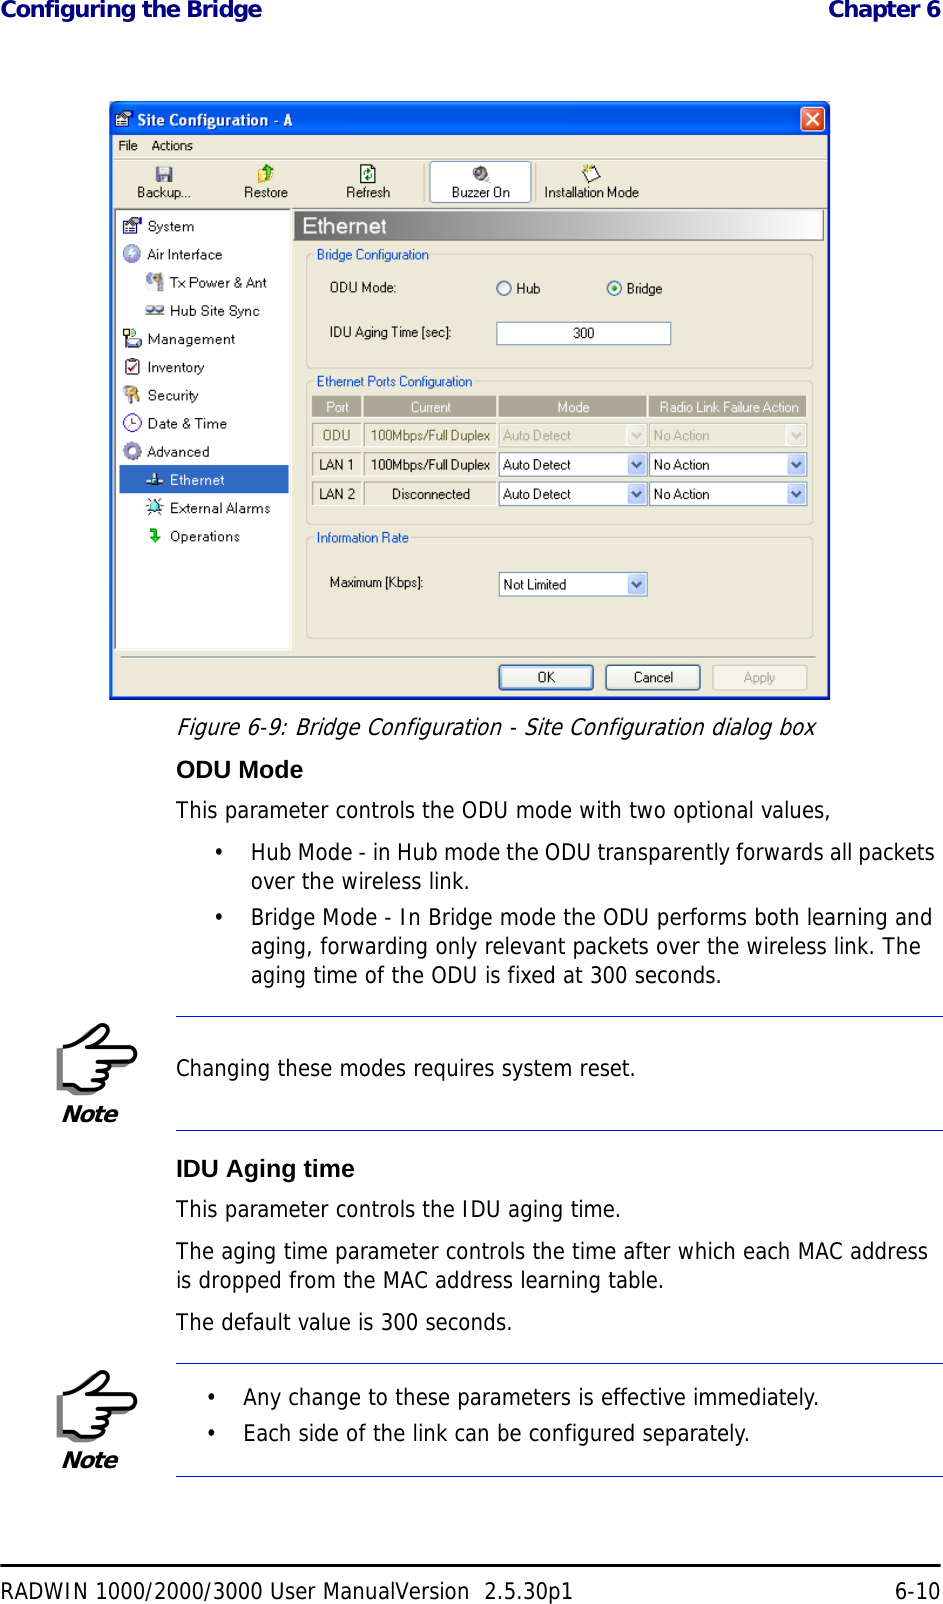 Configuring the Bridge  Chapter 6RADWIN 1000/2000/3000 User ManualVersion  2.5.30p1 6-10Figure 6-9: Bridge Configuration - Site Configuration dialog boxODU ModeThis parameter controls the ODU mode with two optional values, • Hub Mode - in Hub mode the ODU transparently forwards all packets over the wireless link.• Bridge Mode - In Bridge mode the ODU performs both learning and aging, forwarding only relevant packets over the wireless link. The aging time of the ODU is fixed at 300 seconds.IDU Aging timeThis parameter controls the IDU aging time.The aging time parameter controls the time after which each MAC address is dropped from the MAC address learning table.The default value is 300 seconds.NoteChanging these modes requires system reset.Note• Any change to these parameters is effective immediately.• Each side of the link can be configured separately.